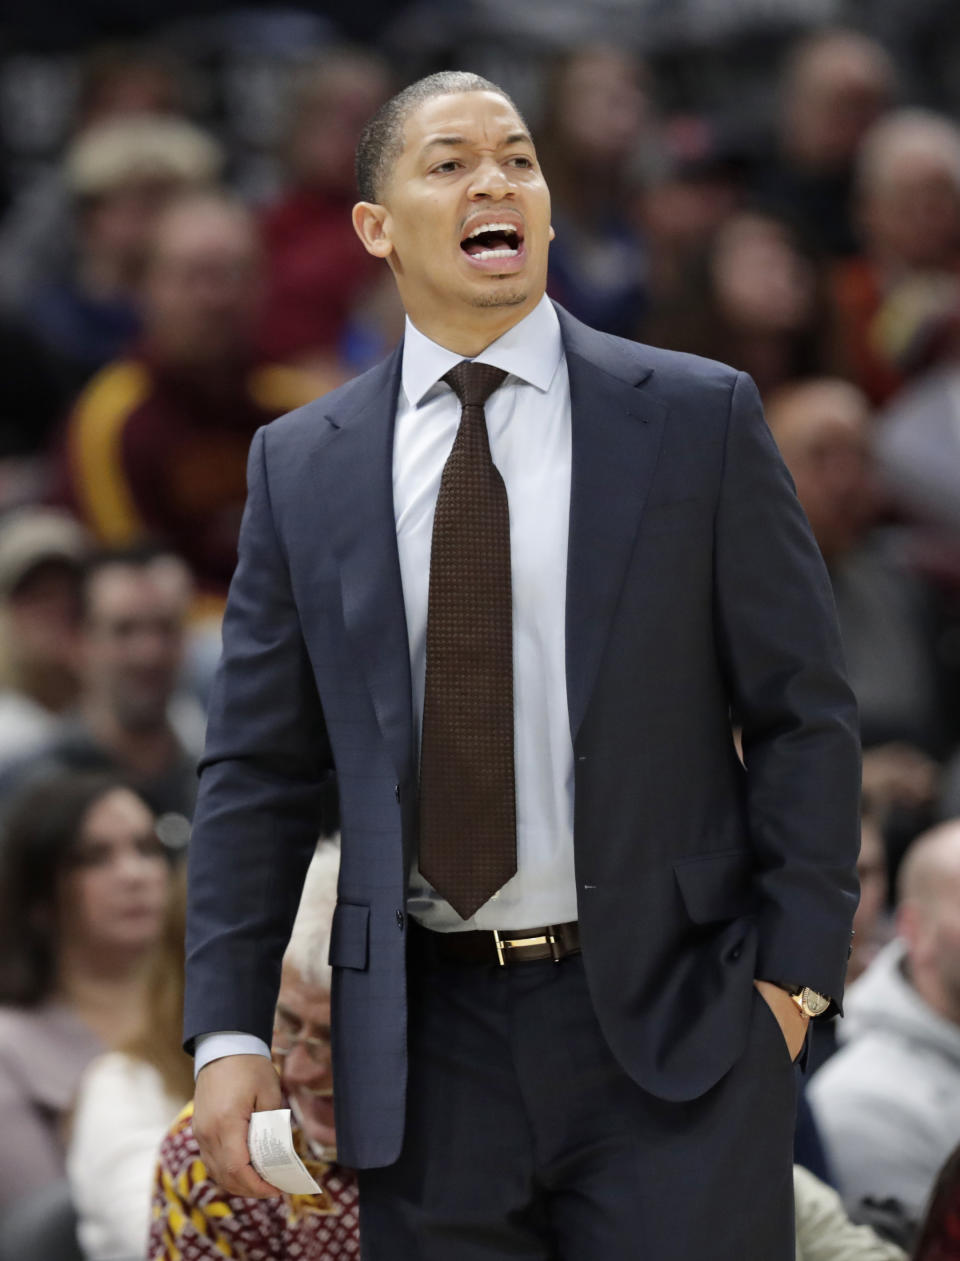 Cleveland Cavaliers head coach Tyronn Lue yells instructions to players in the first half of an NBA basketball game against the Indiana Pacers, Saturday, Oct. 27, 2018, in Cleveland. (AP Photo/Tony Dejak)